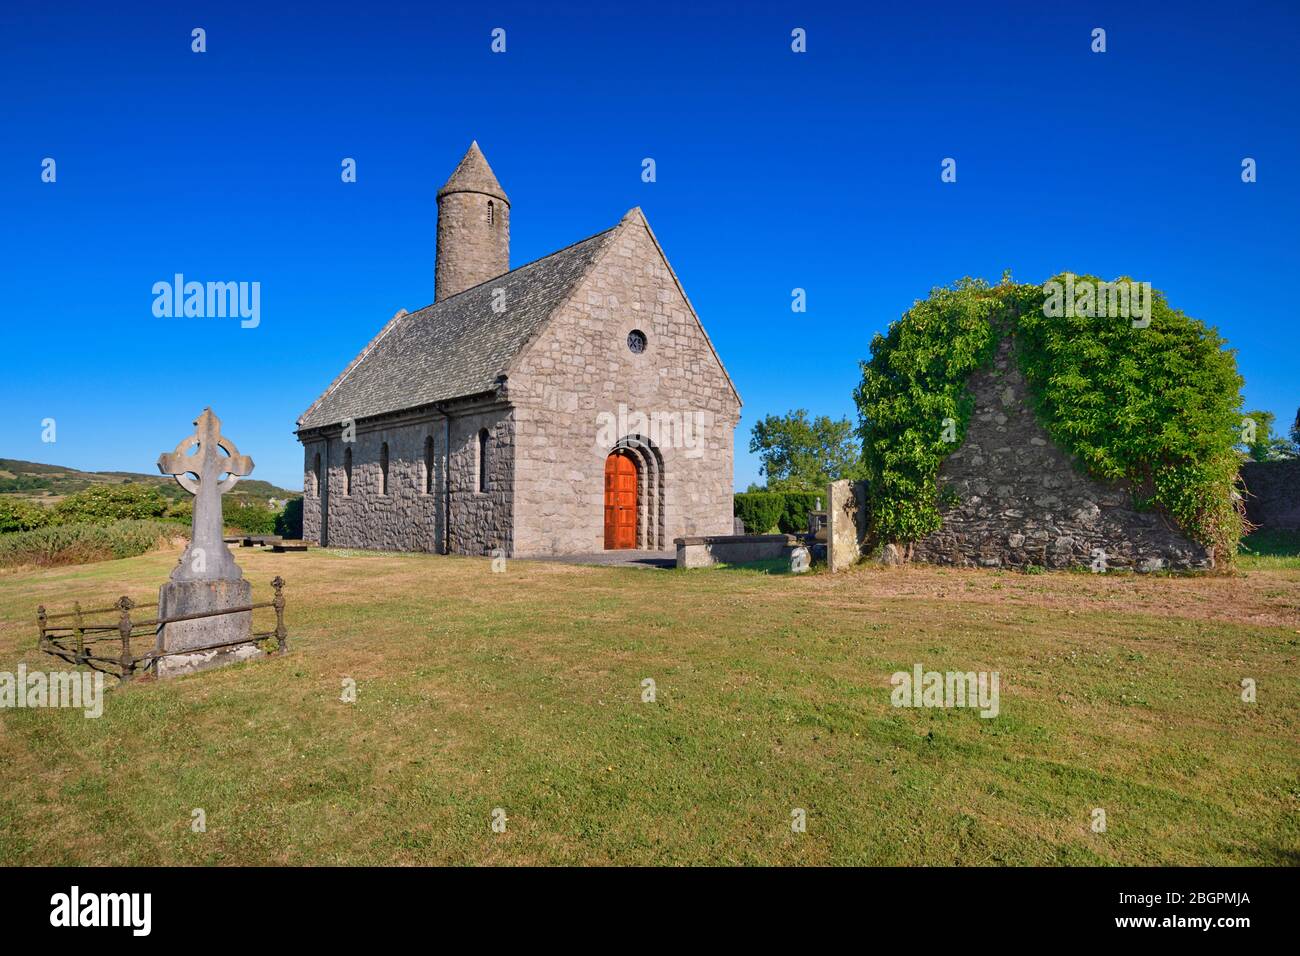 Ireland, County Down, Saul, Commemorative church built in 1933 on the site of St Patrick's first church in Ireland. Stock Photo